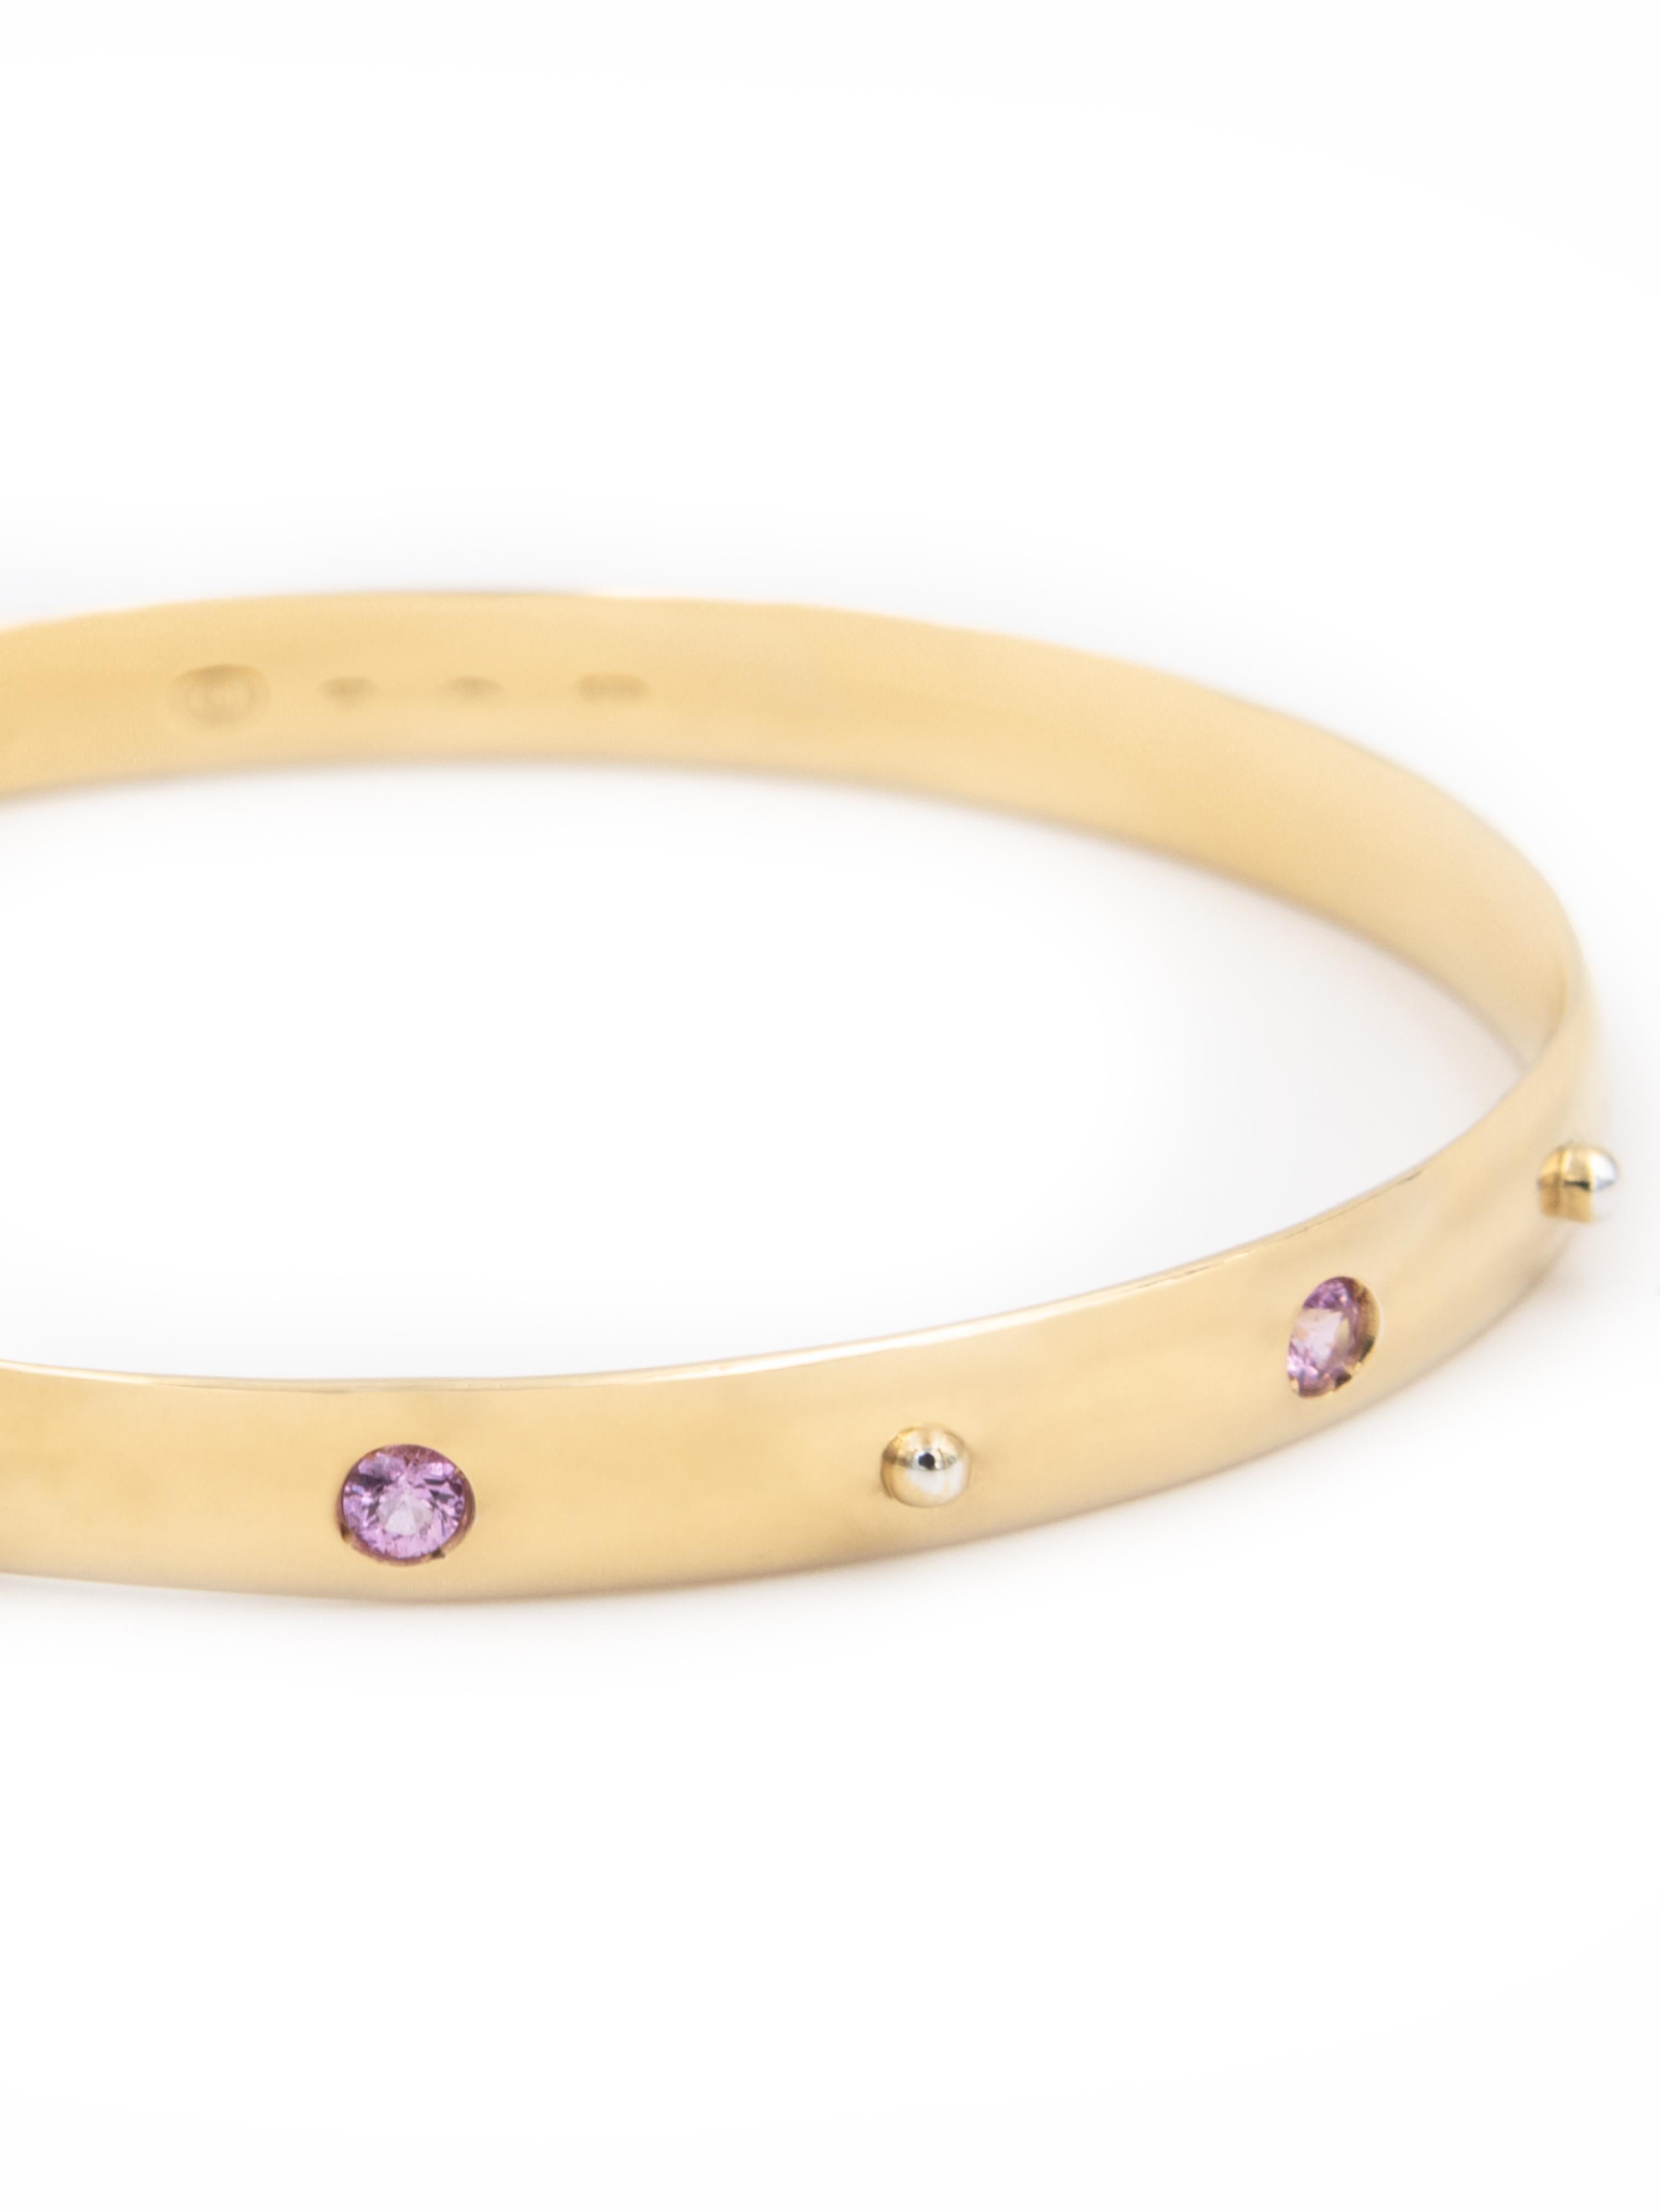 18 karat yellow gold bangle stacking bracelet with three aquamarines.  
  
This bracelet is available in a standard diameter of 6,25 cm (2,46 inch), intended to fit most wrists.

Perfect worn alone or for stacking with the other stacking bracelets